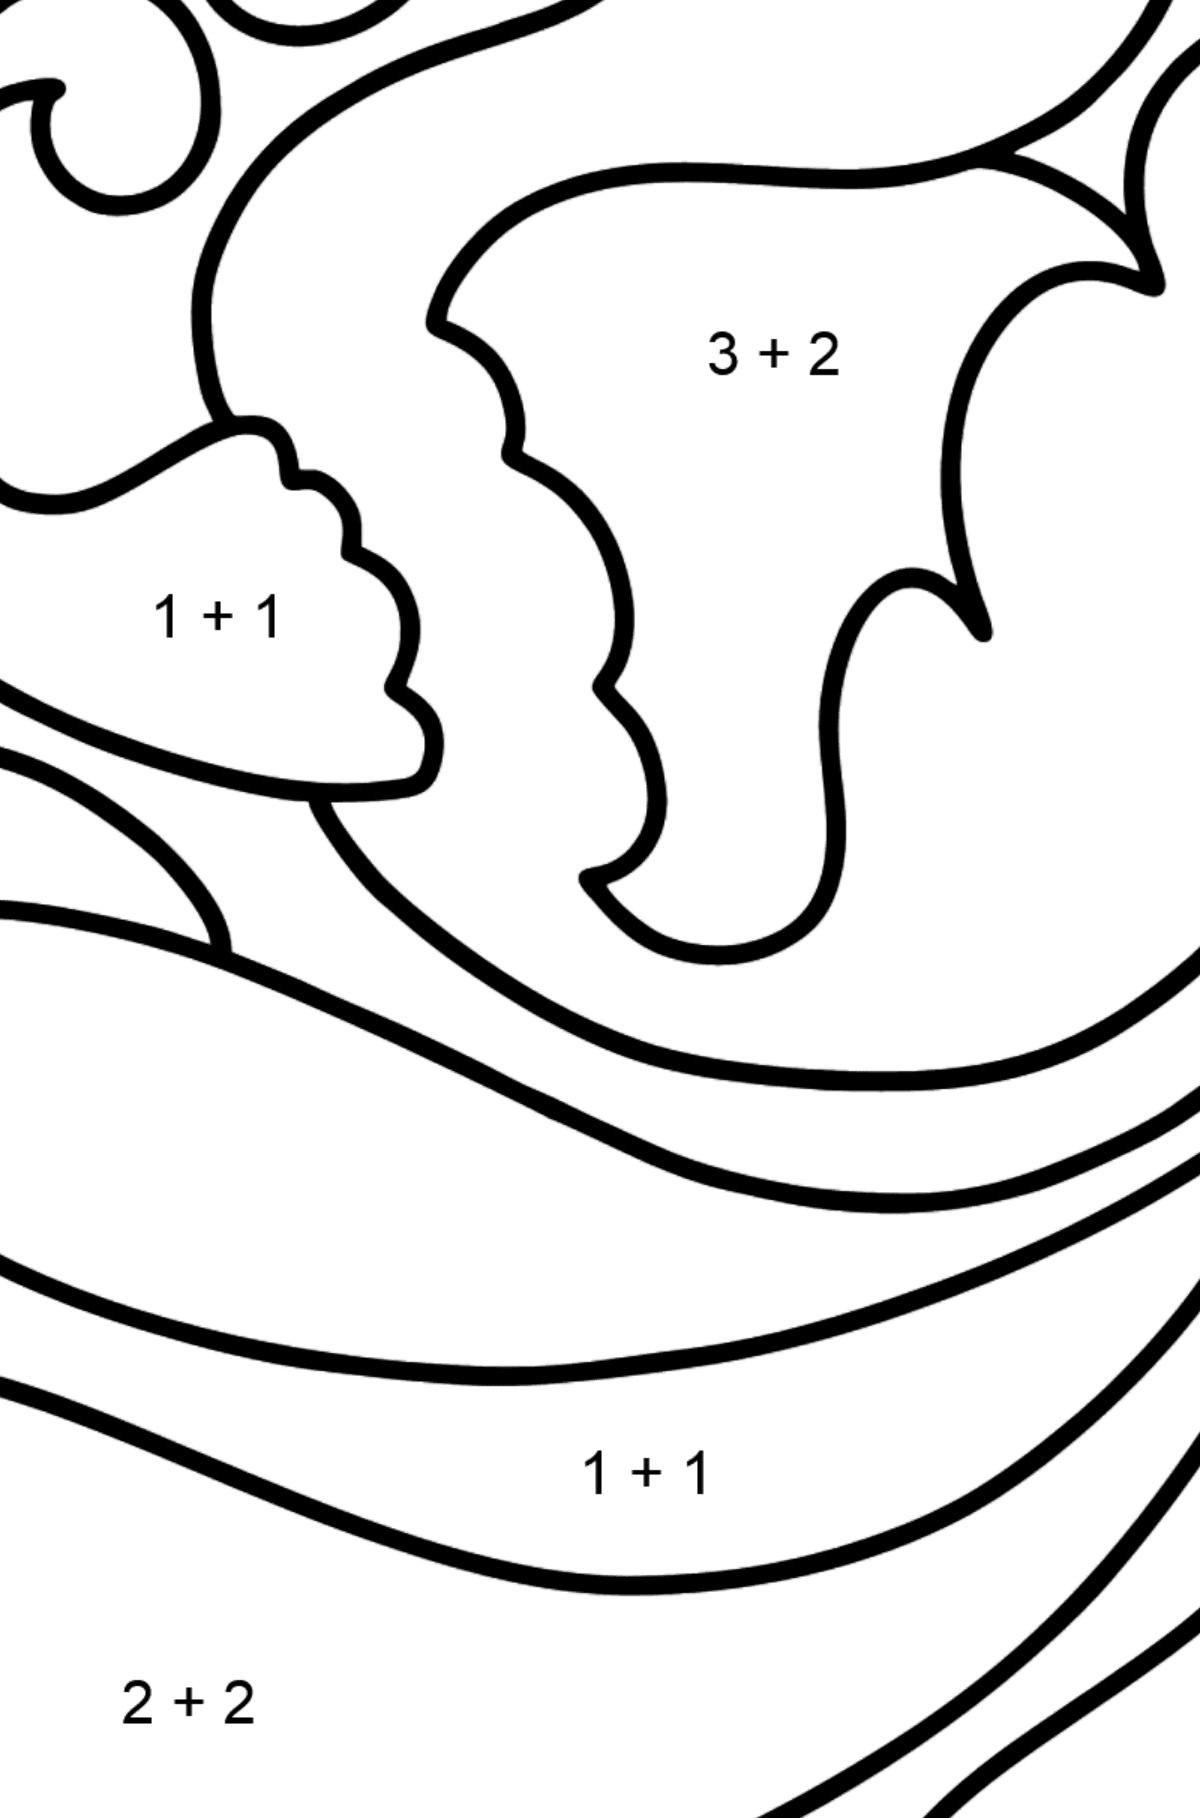 Firebird coloring page - Math Coloring - Addition for Kids